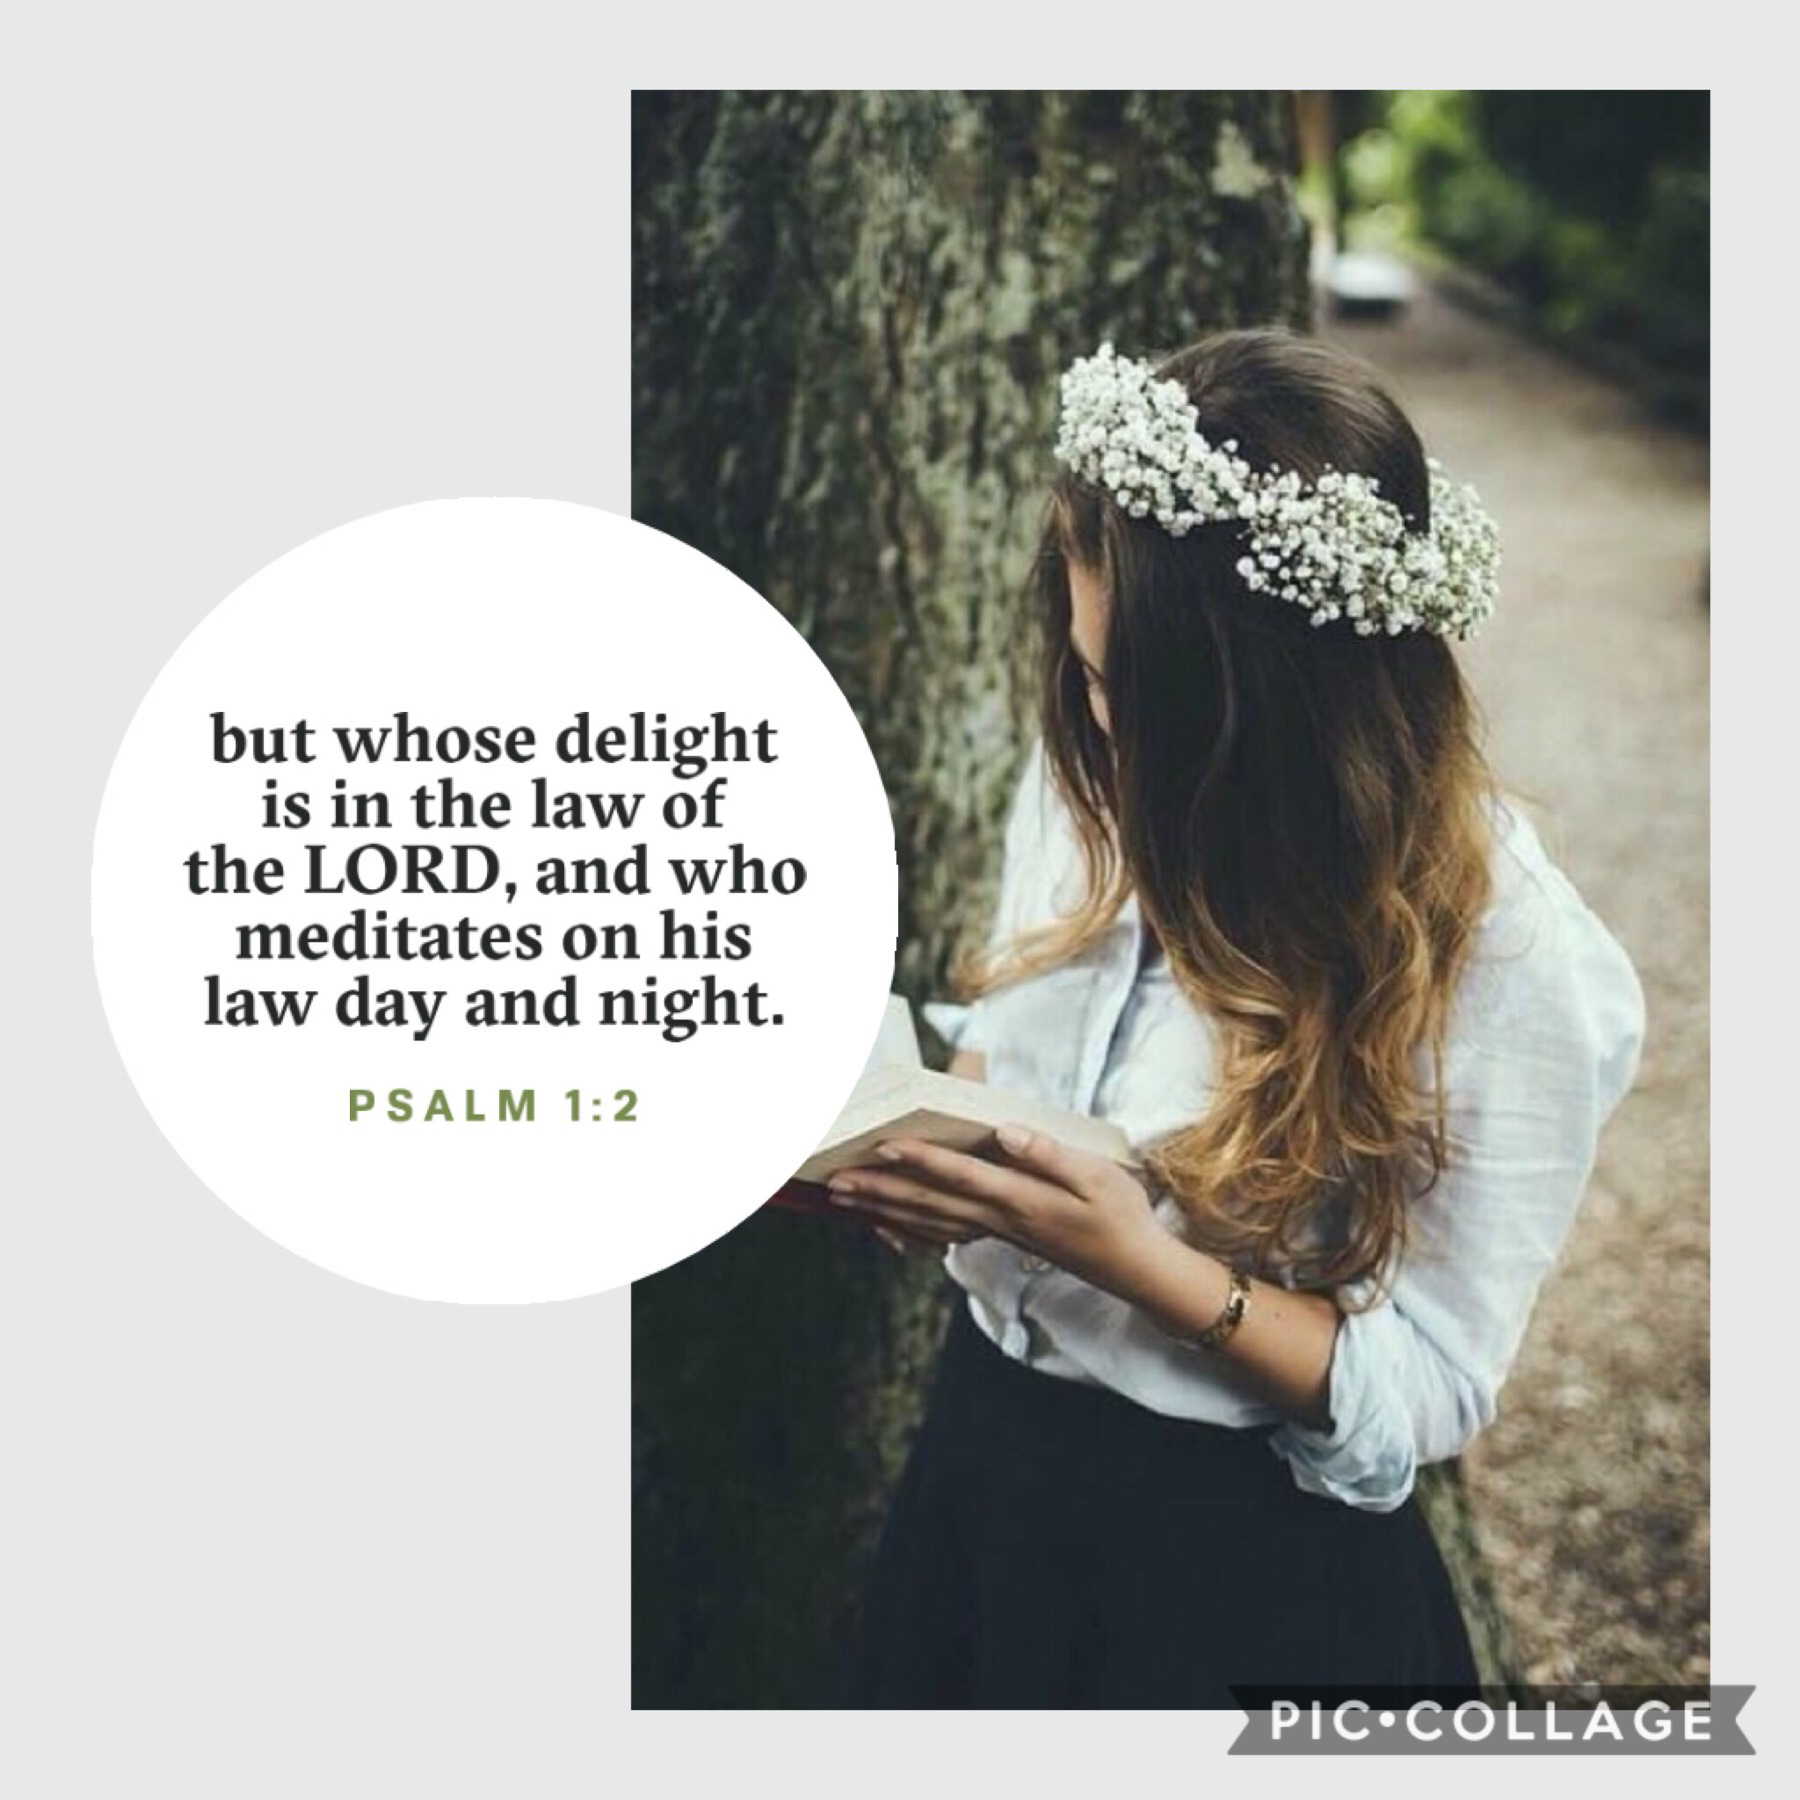 SqueekyPea here! I used this app called Bible Lens to make this wonderful bible verse!! I love this app so, so much! Thank you all so much for your support on our account!